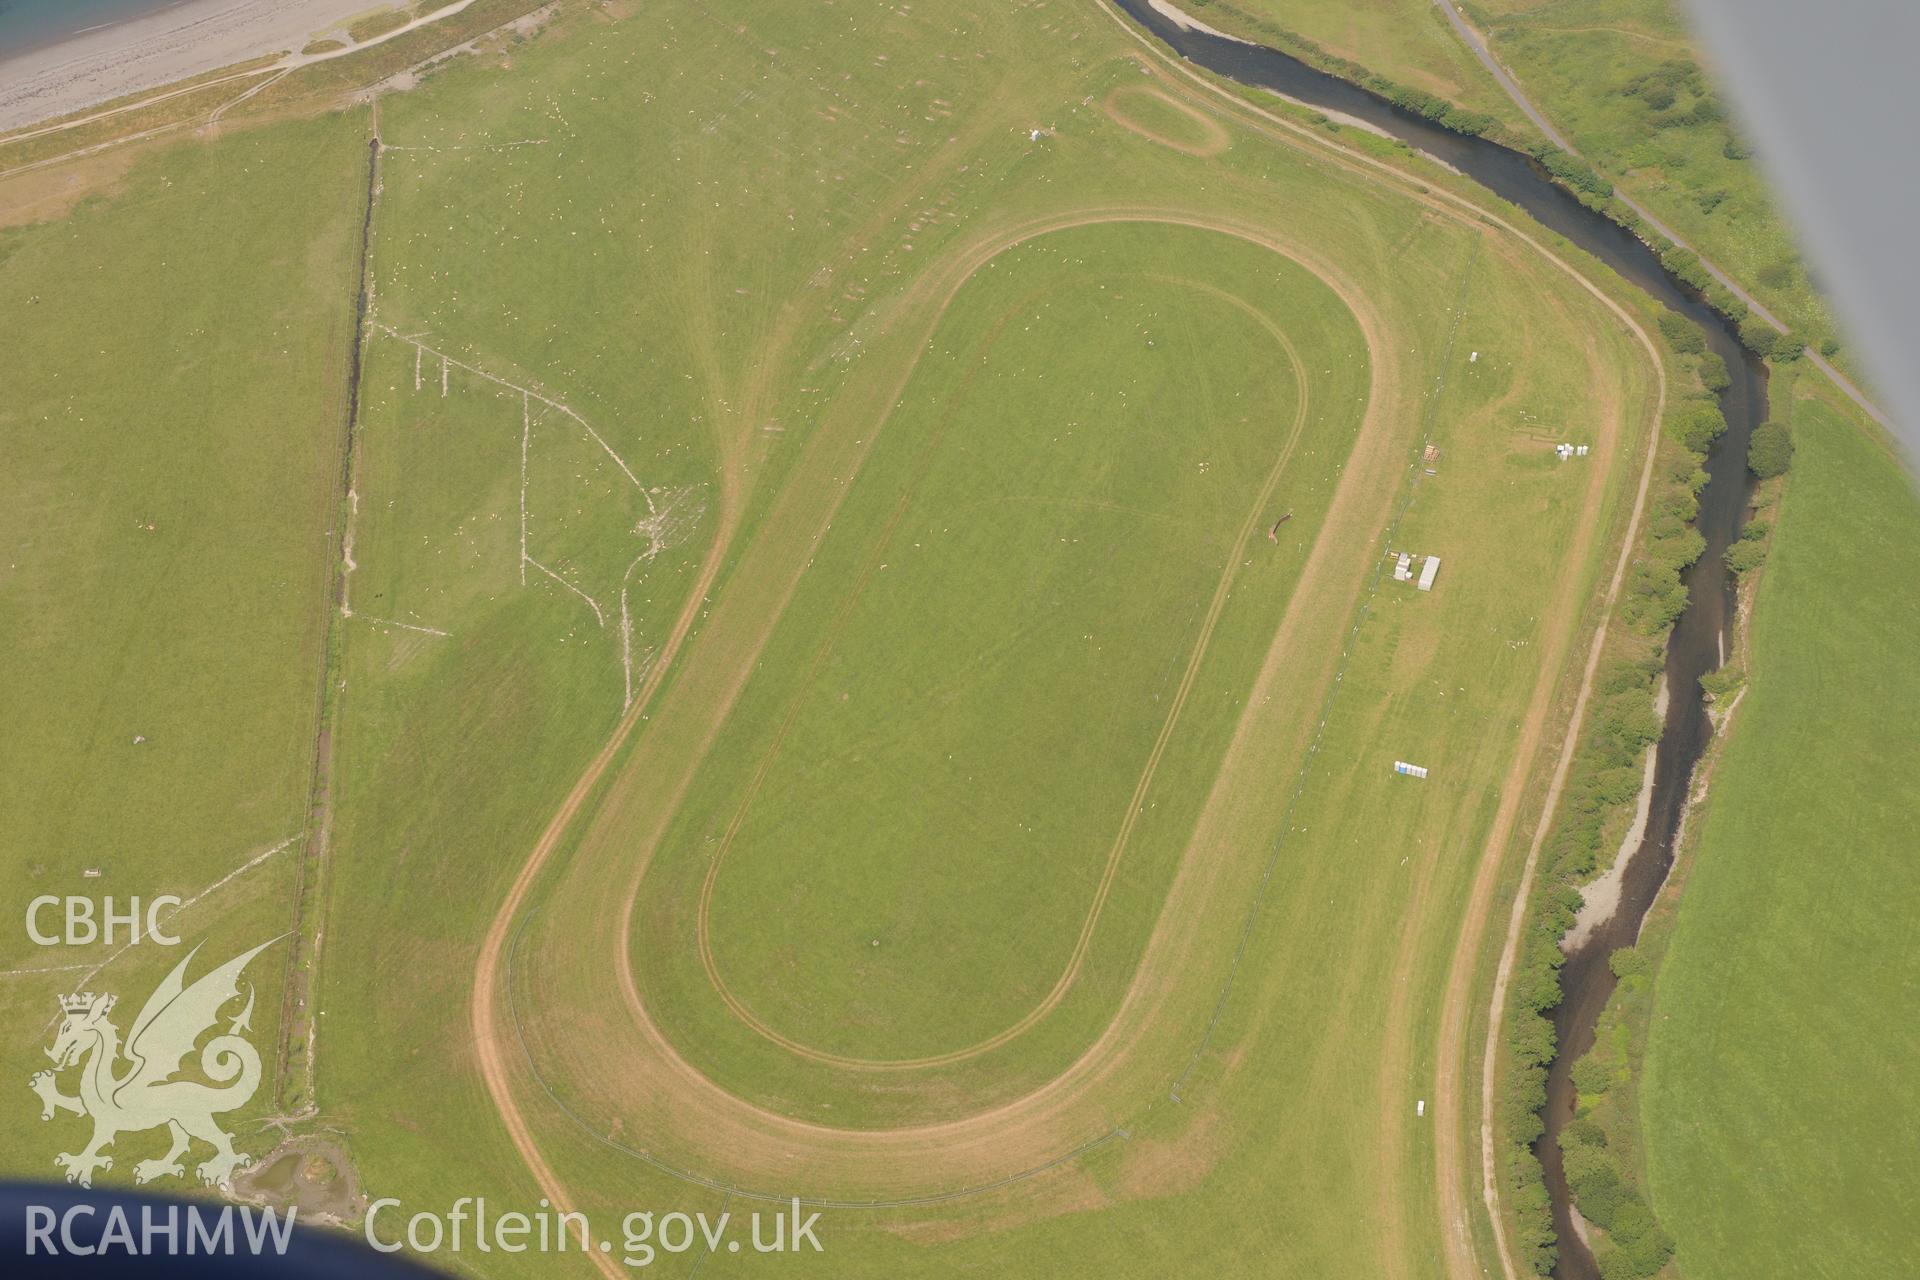 Ceredigion Trotting Circuit at Tan y Castell, Aberystwyth. Oblique aerial photograph taken during the Royal Commission?s programme of archaeological aerial reconnaissance by Toby Driver on 12th July 2013.